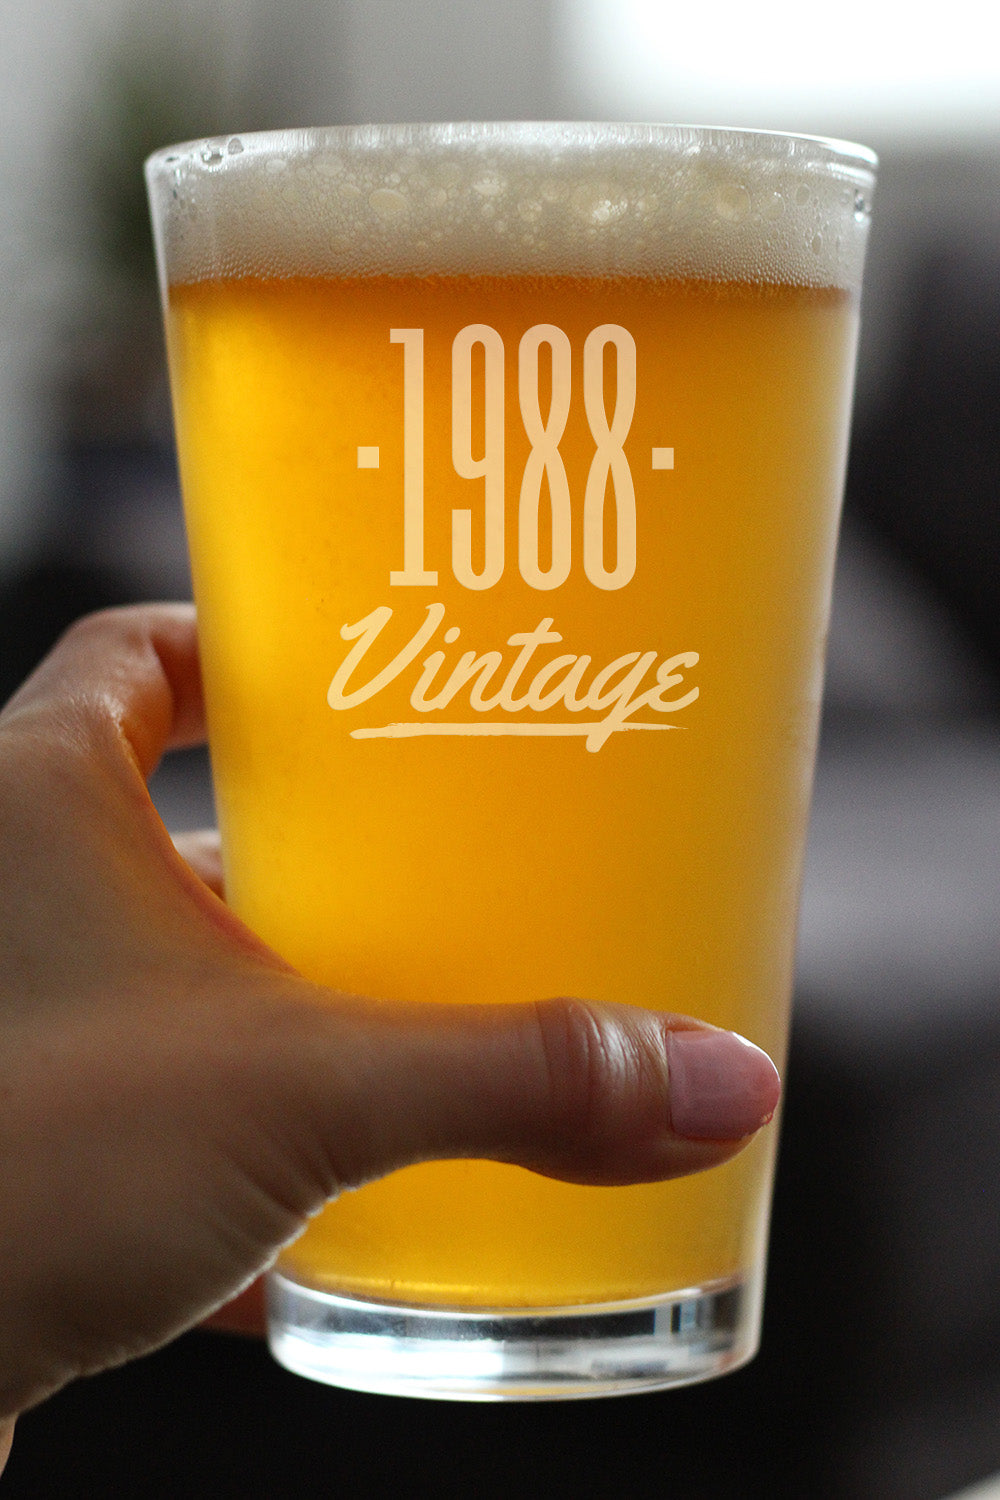 Vintage 1988 - Pint Glass for Beer - 36th Birthday Gifts for Men or Women Turning 36 - Fun Bday Party Decor - 16 oz